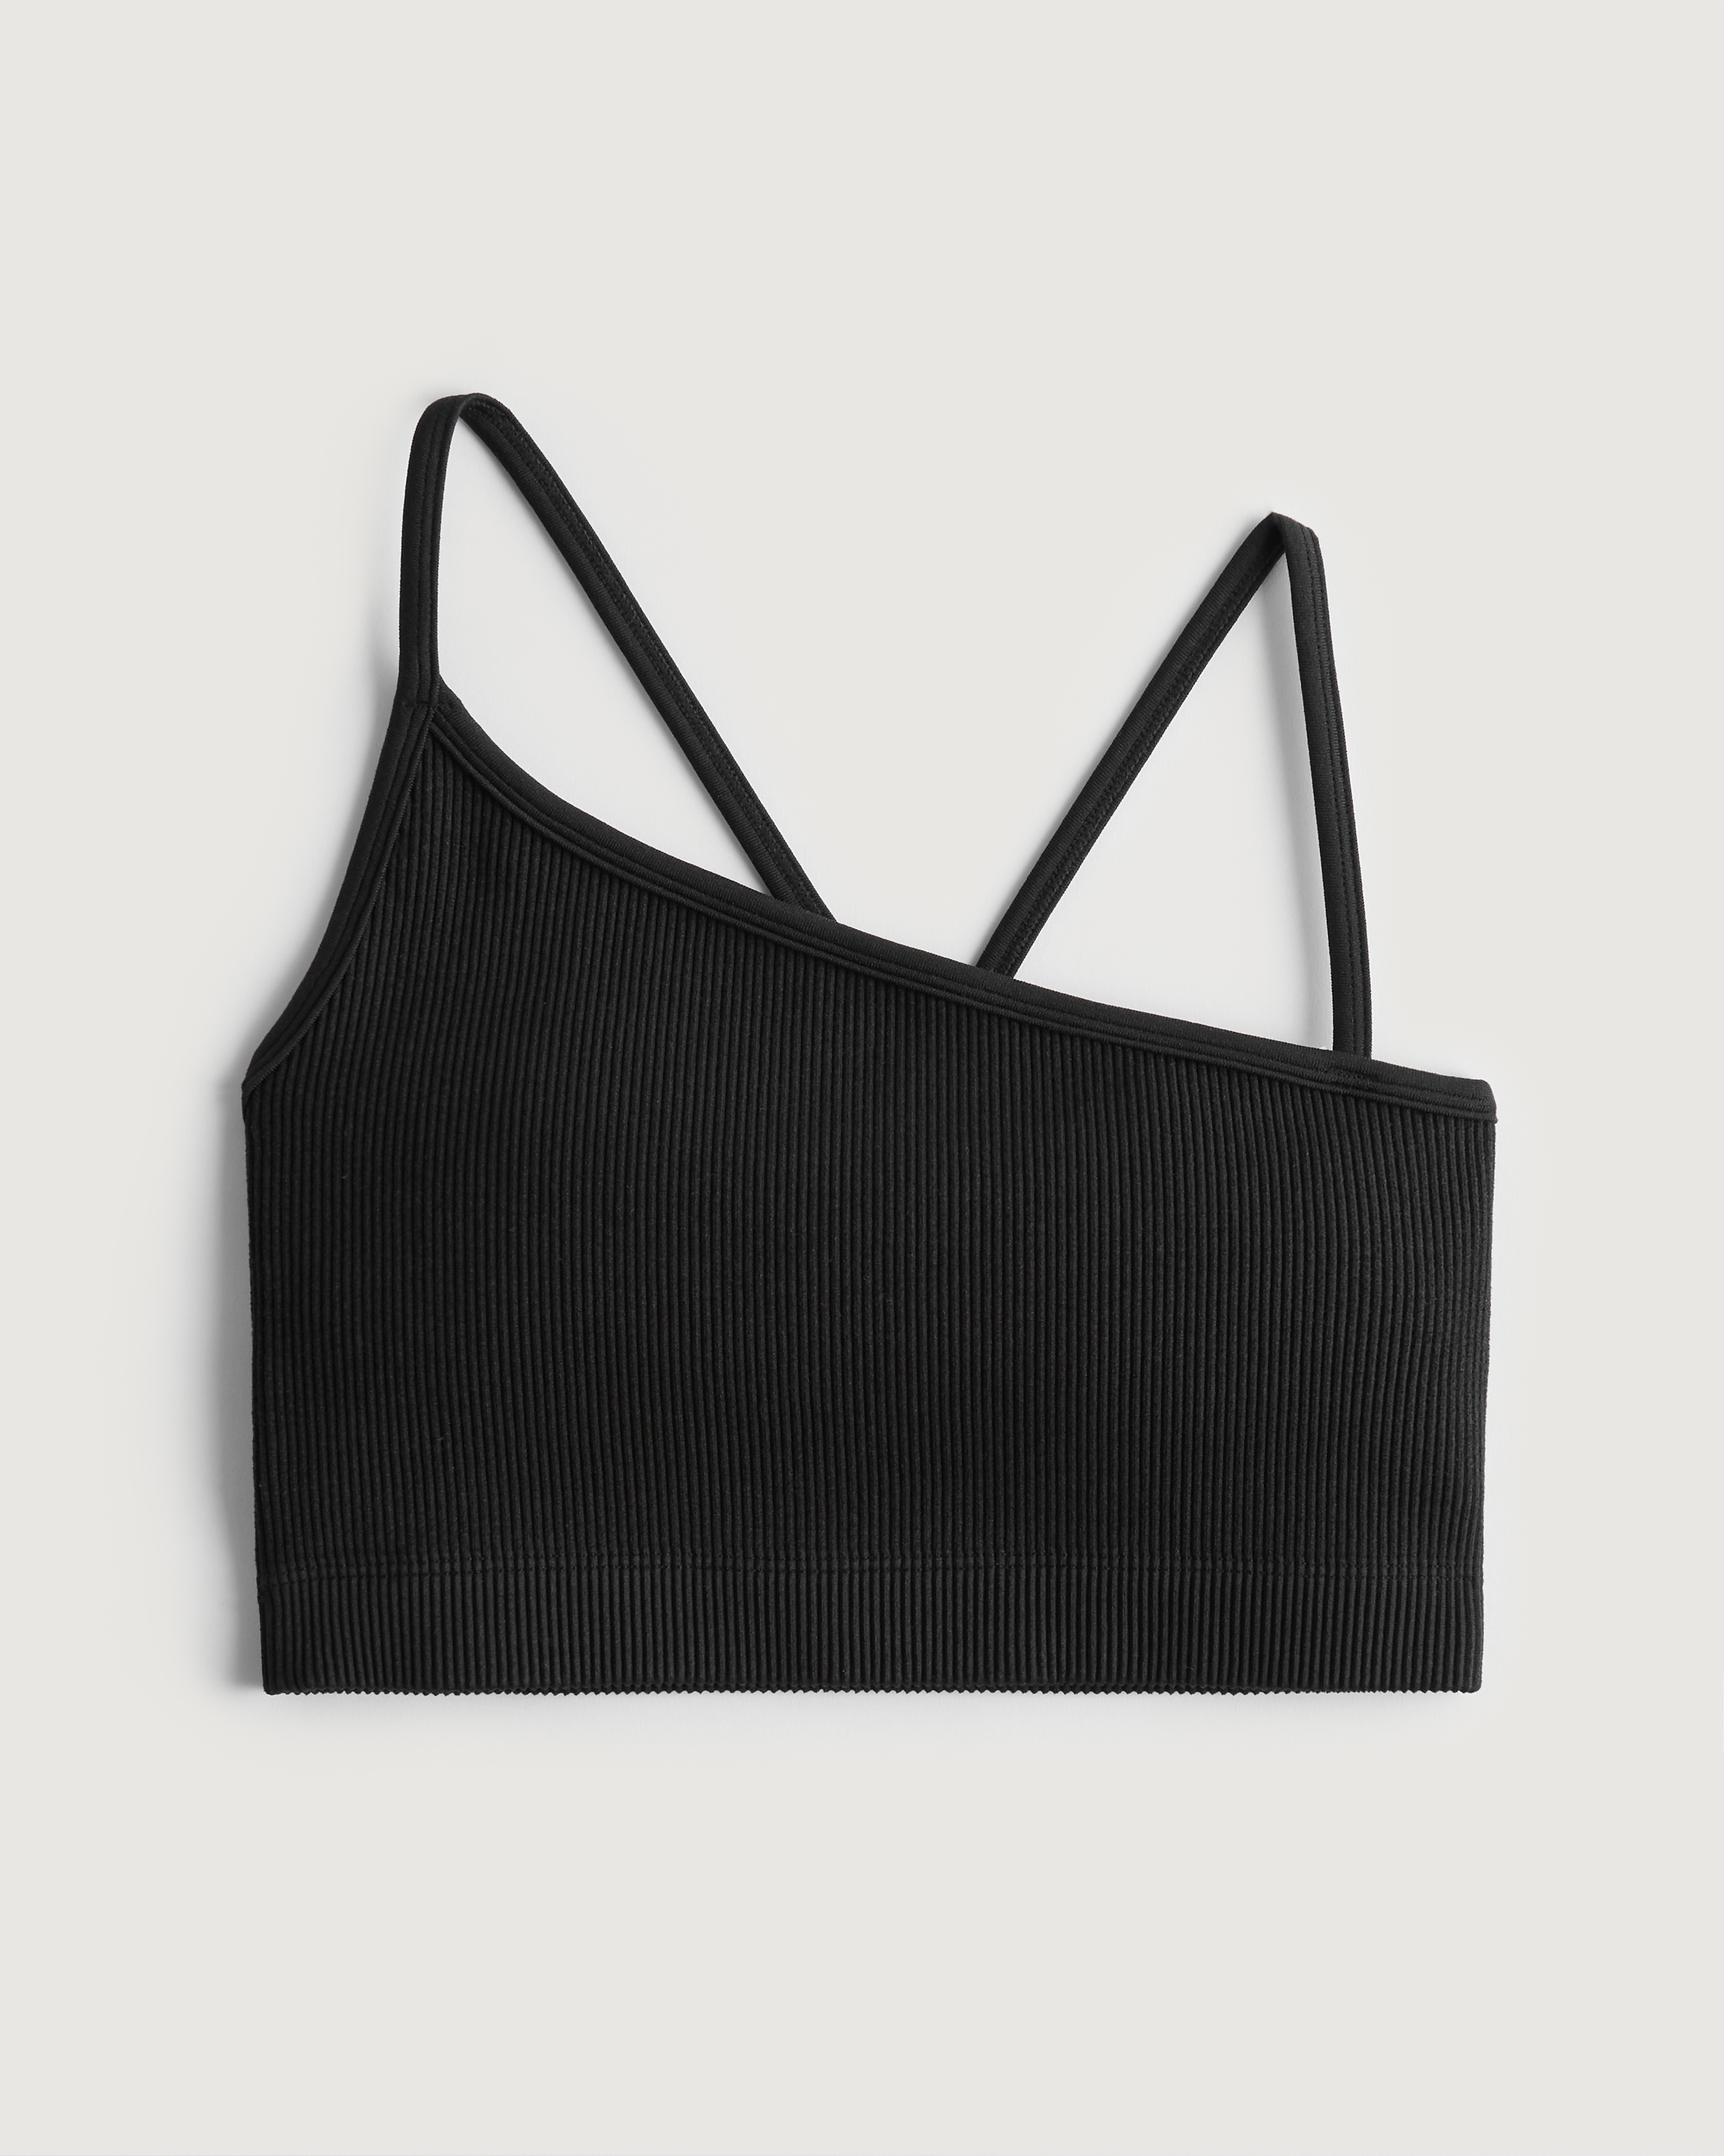 Gilly Hicks Green Sports Bras for Women